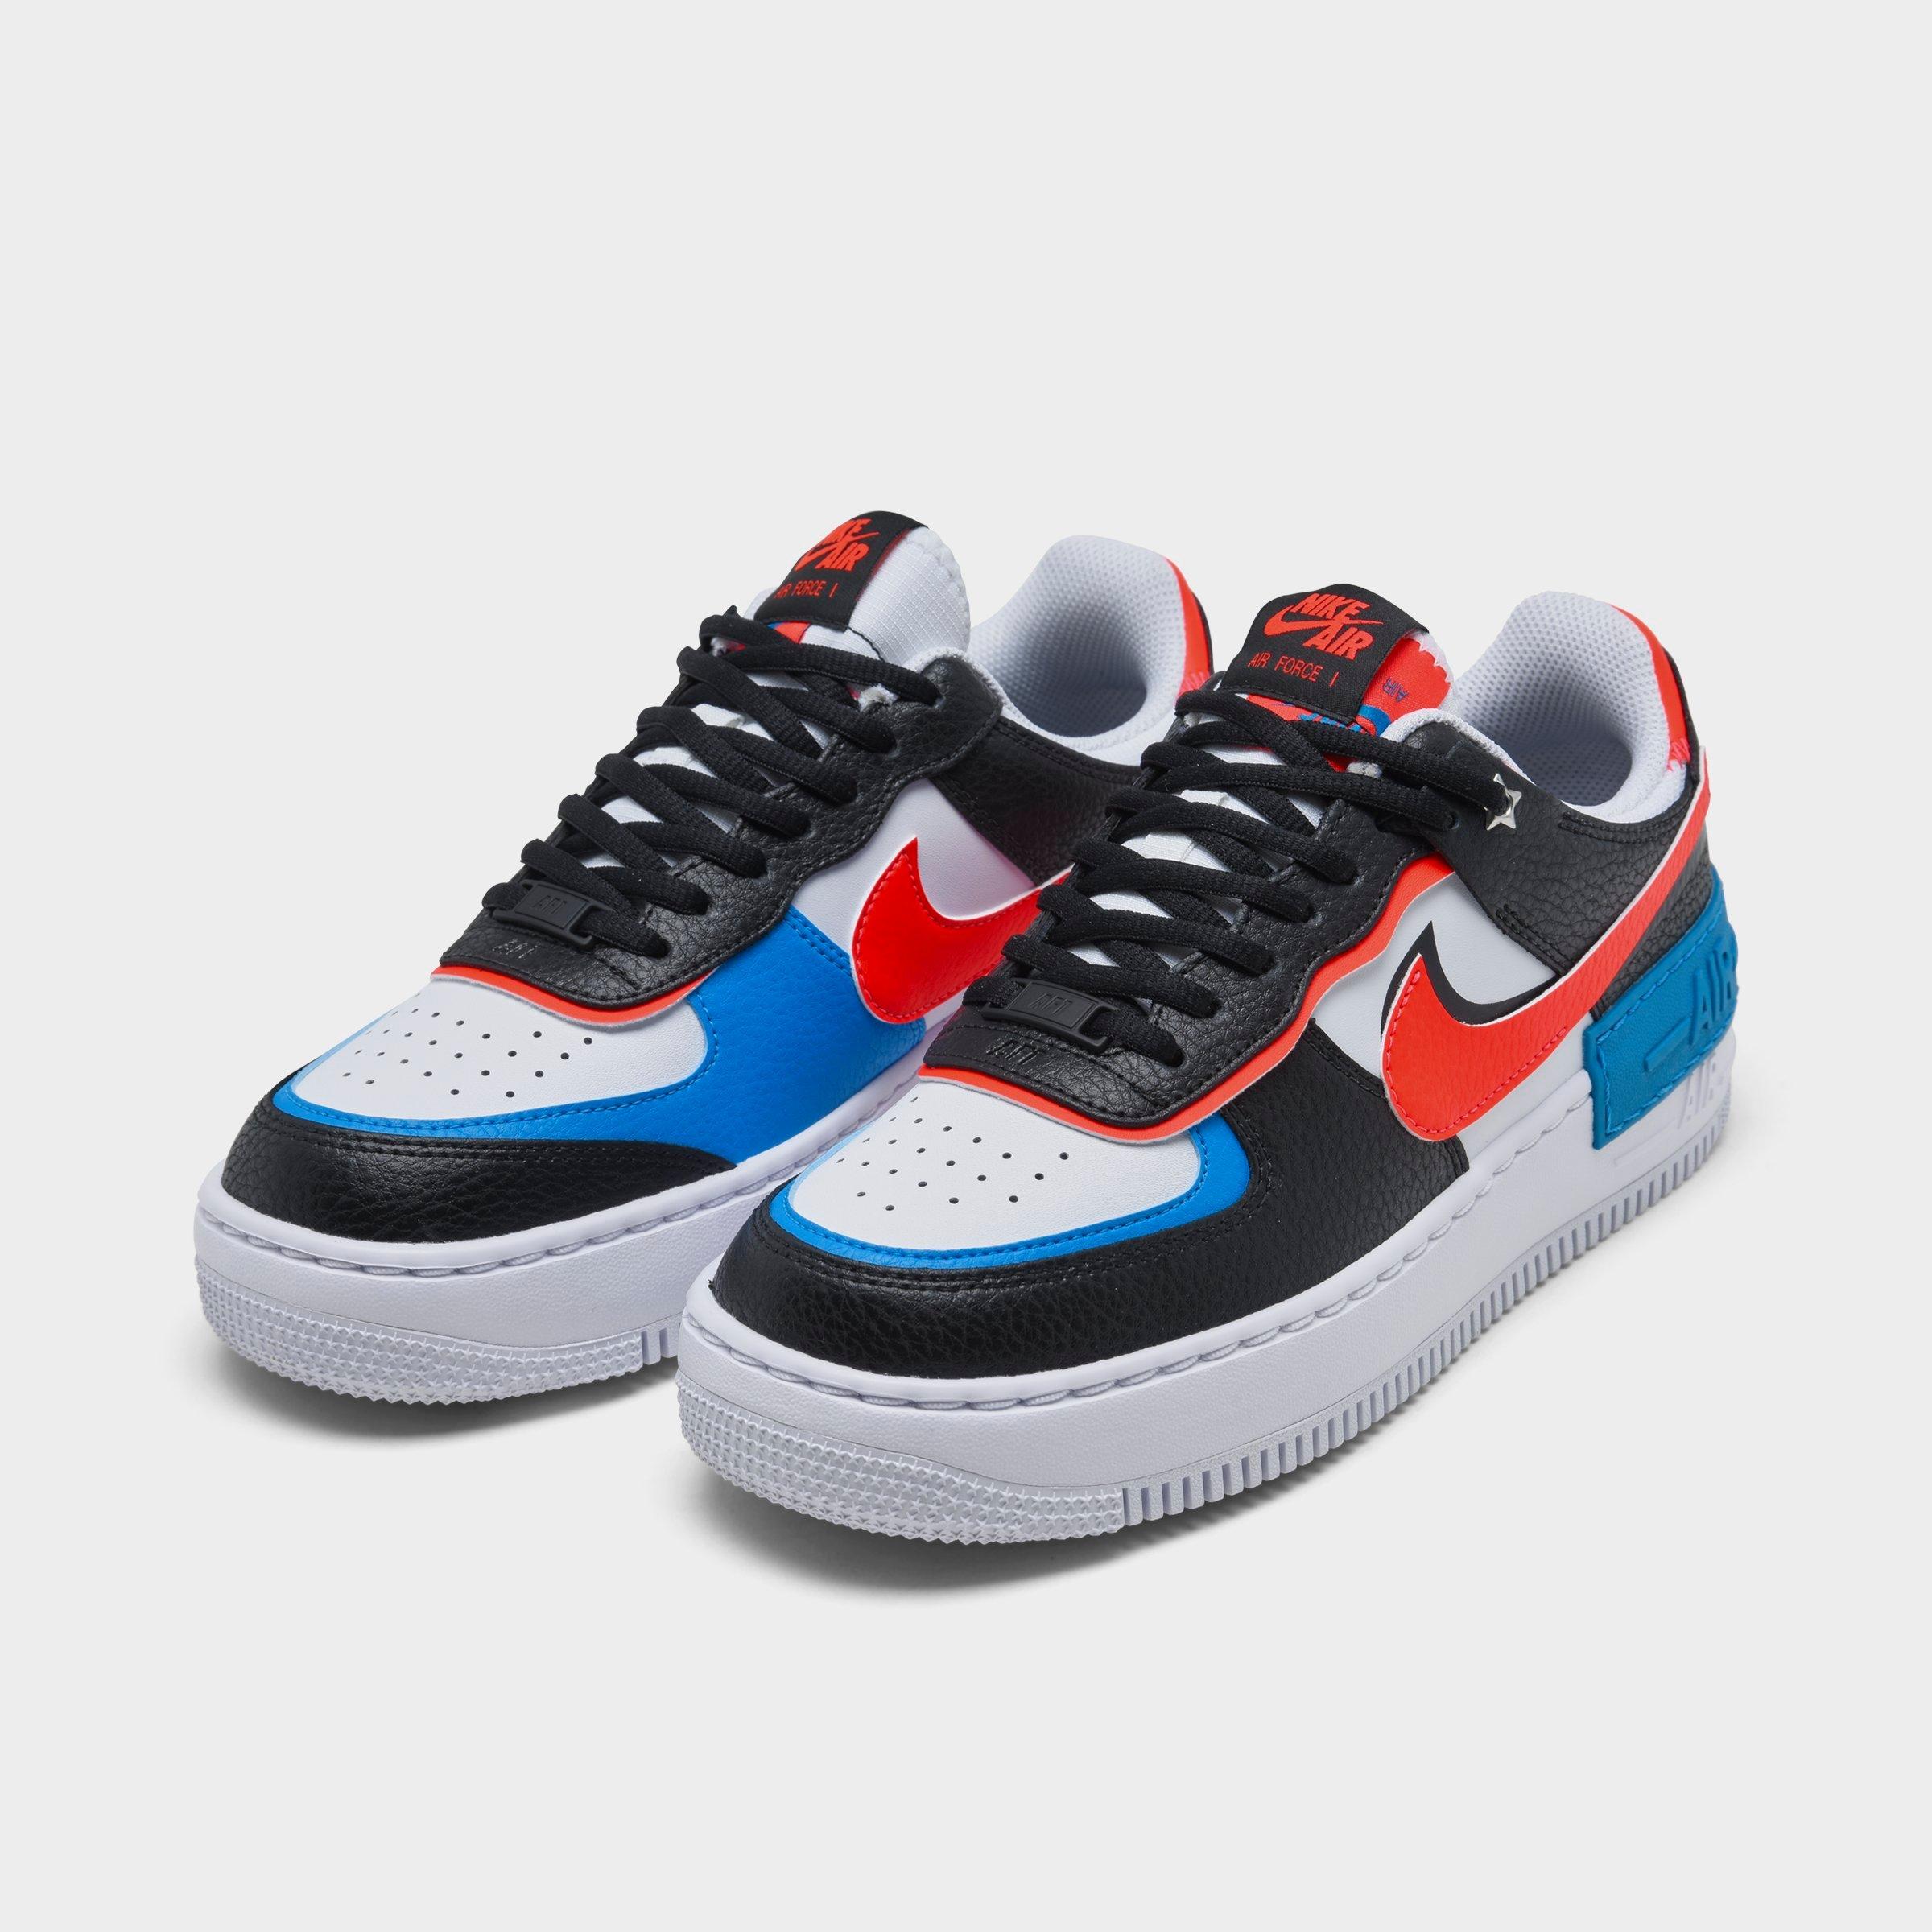 colorful womens air force ones